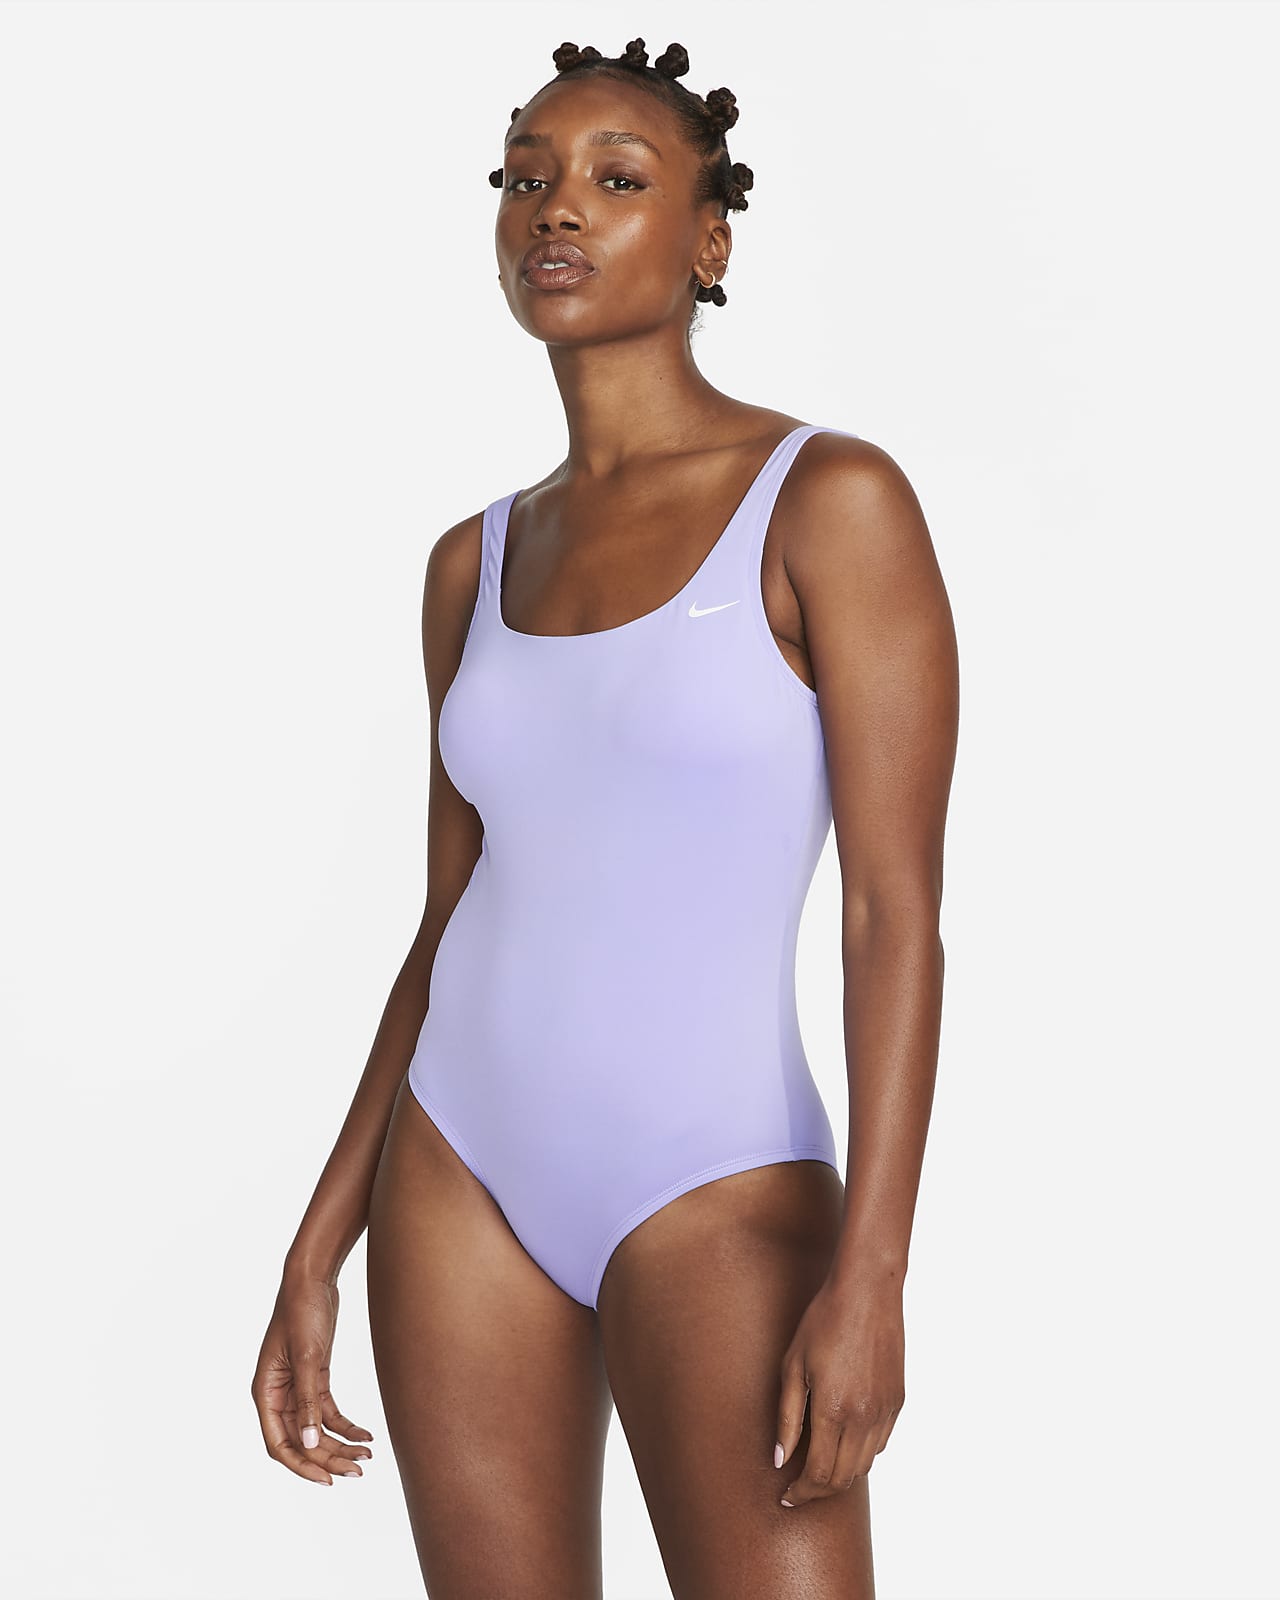 NIKE Releases New Women's Swimsuit With Extra Space For Male